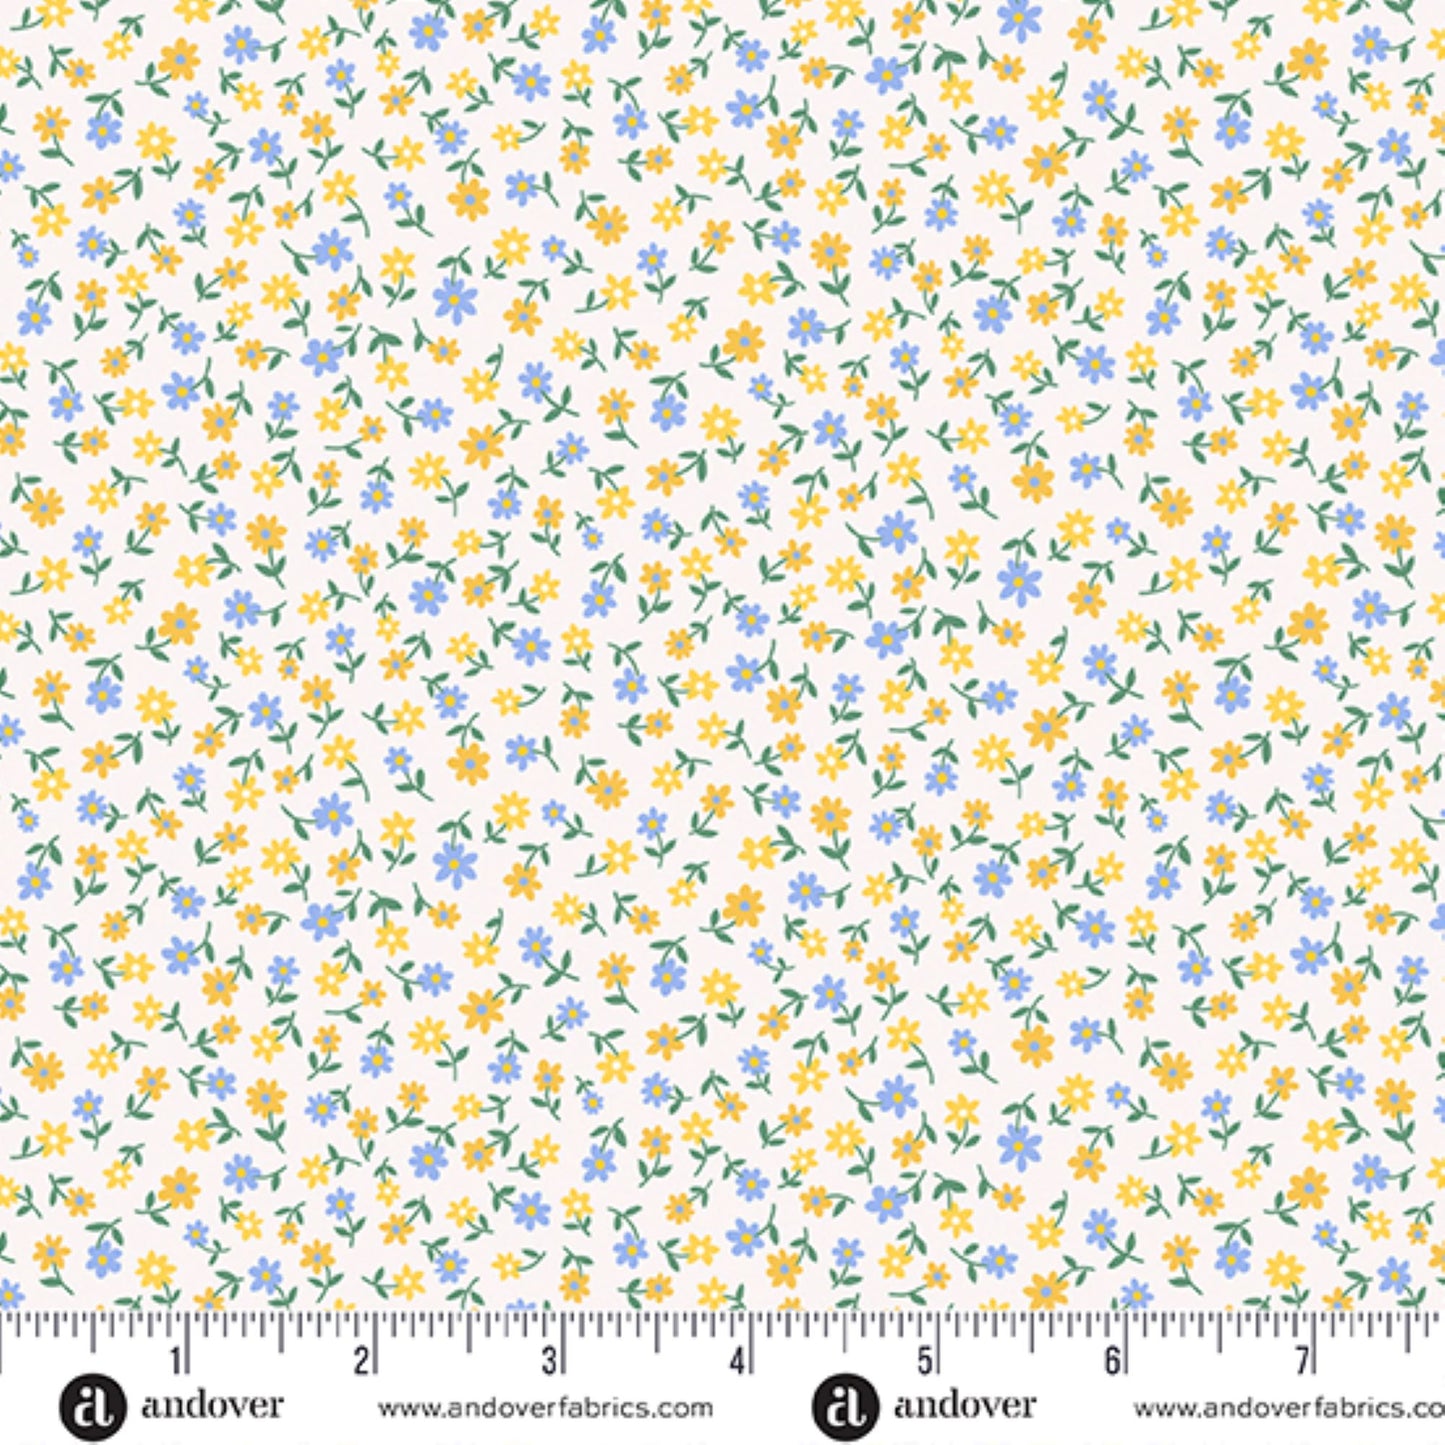 Country Cuttings florals yellow blue bundle - 6 Fat Quarters cotton quilt fabric by Makower UK